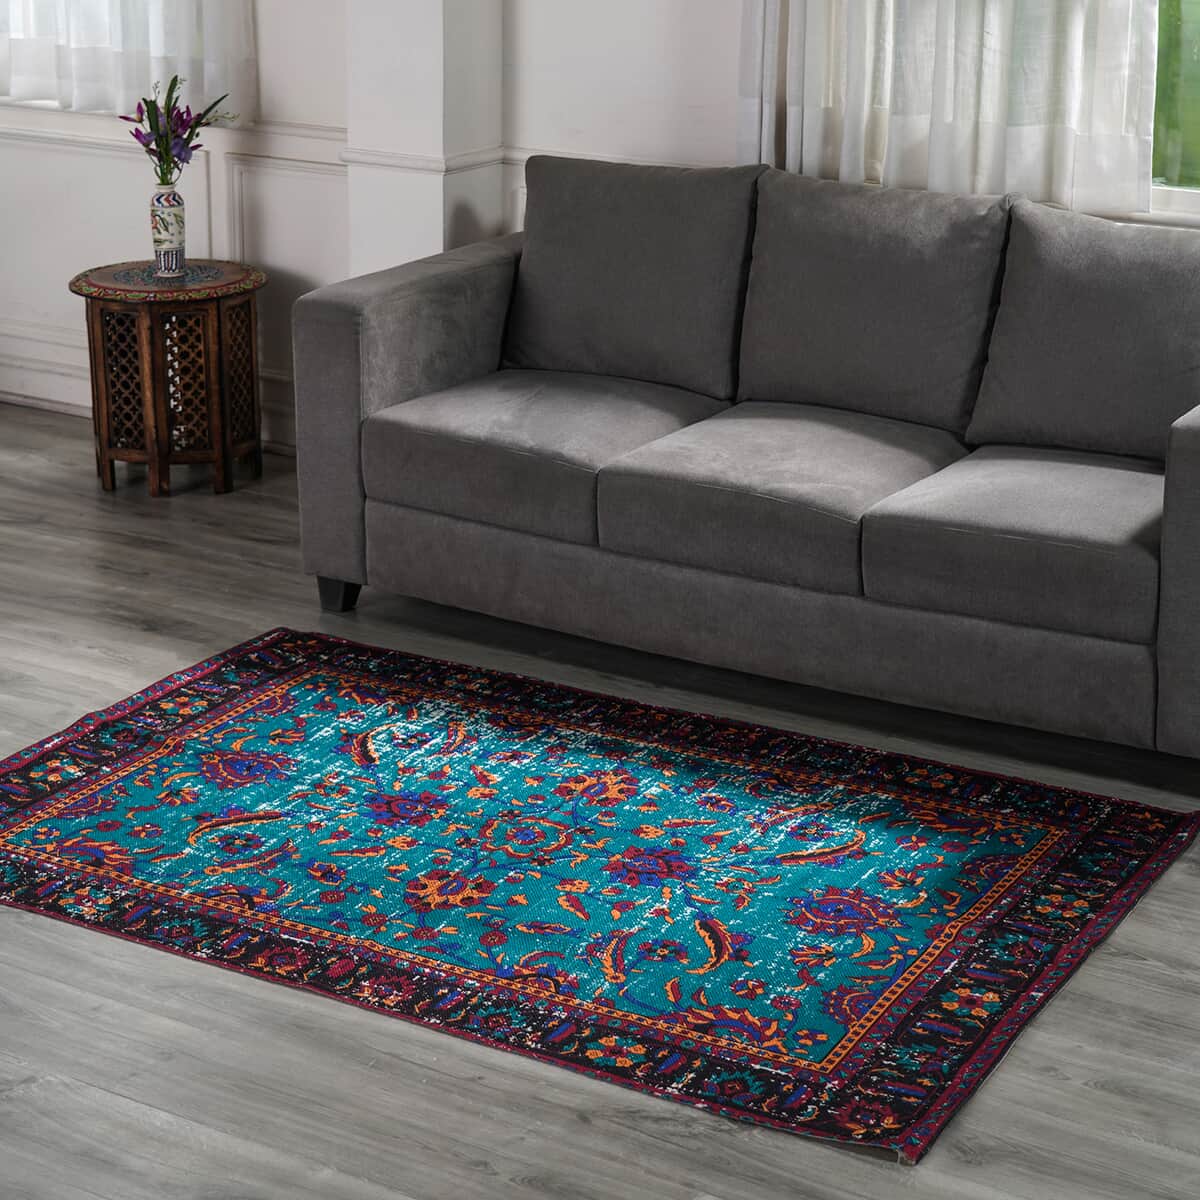 Homesmart Blue Color Handwoven Digital Printed Rug Made from Recycled Plastic Bottles image number 0